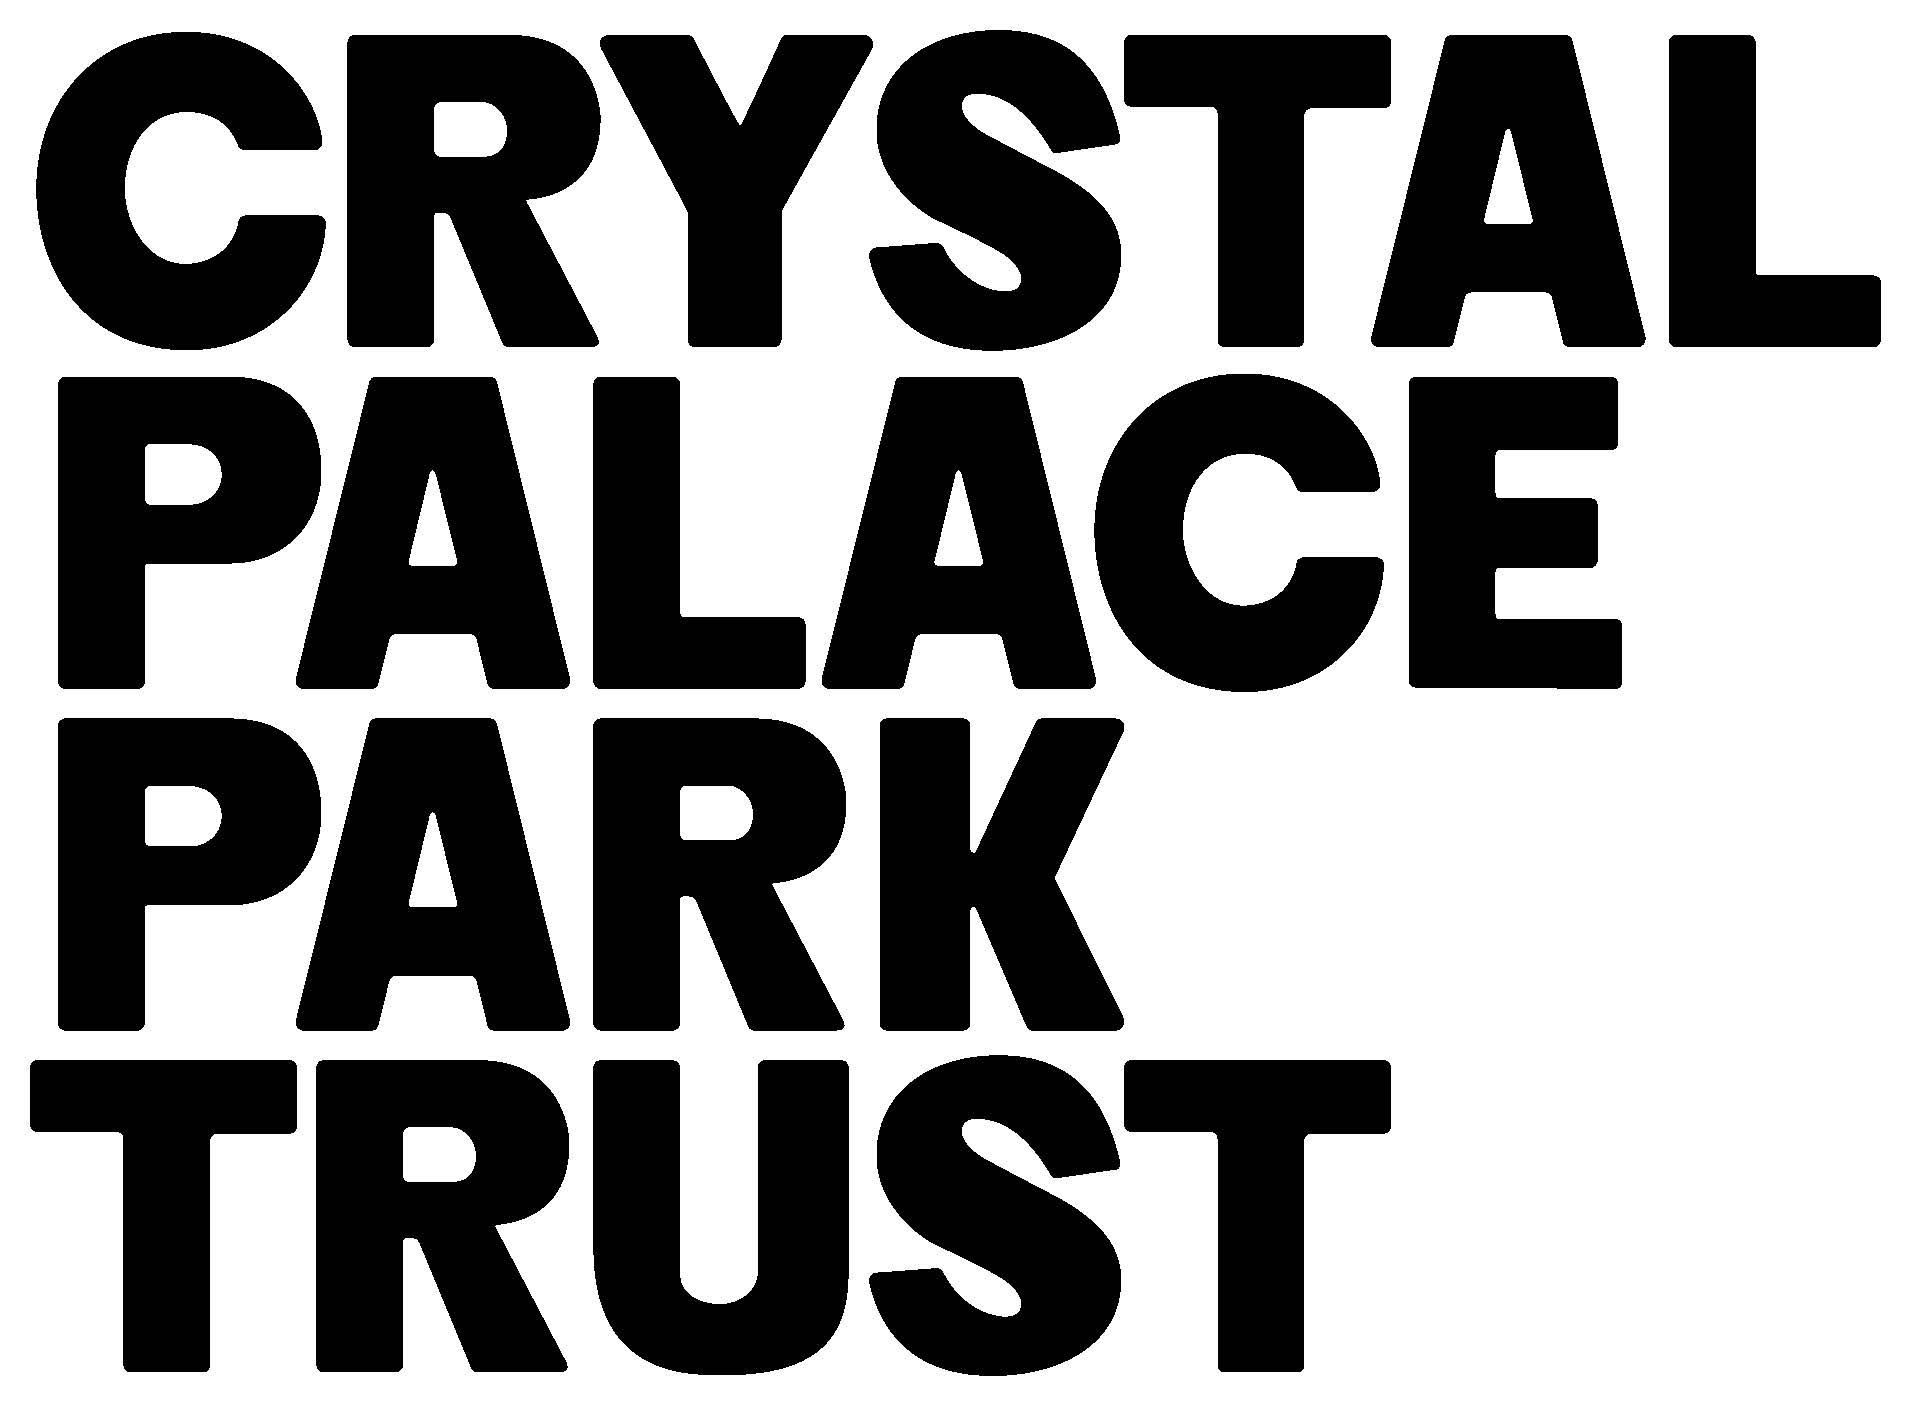 In support of Crystal Palace Park Trust